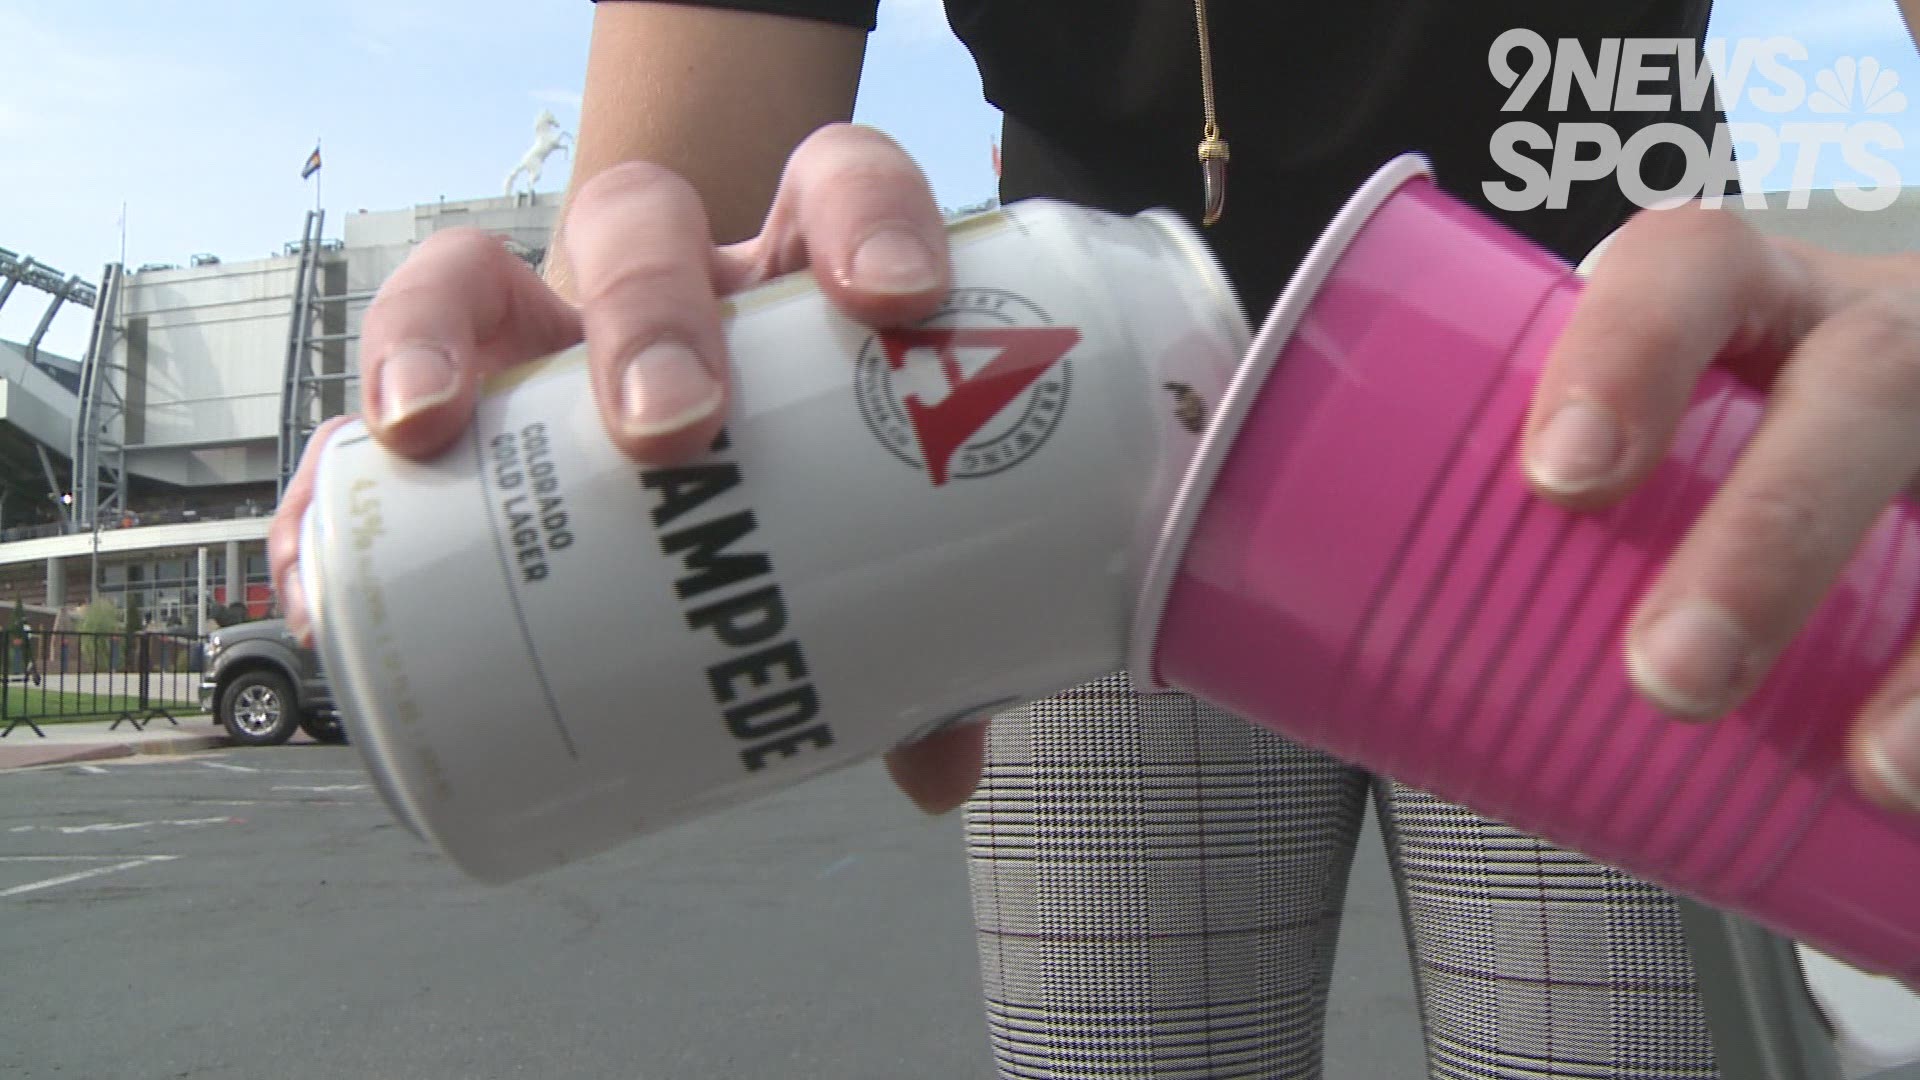 The 9NEWS Sports team tested the taste buds of 20 fans at a tailgate to see which of the local brews would take home the first trophy of the Rocky Mountain Showdown.